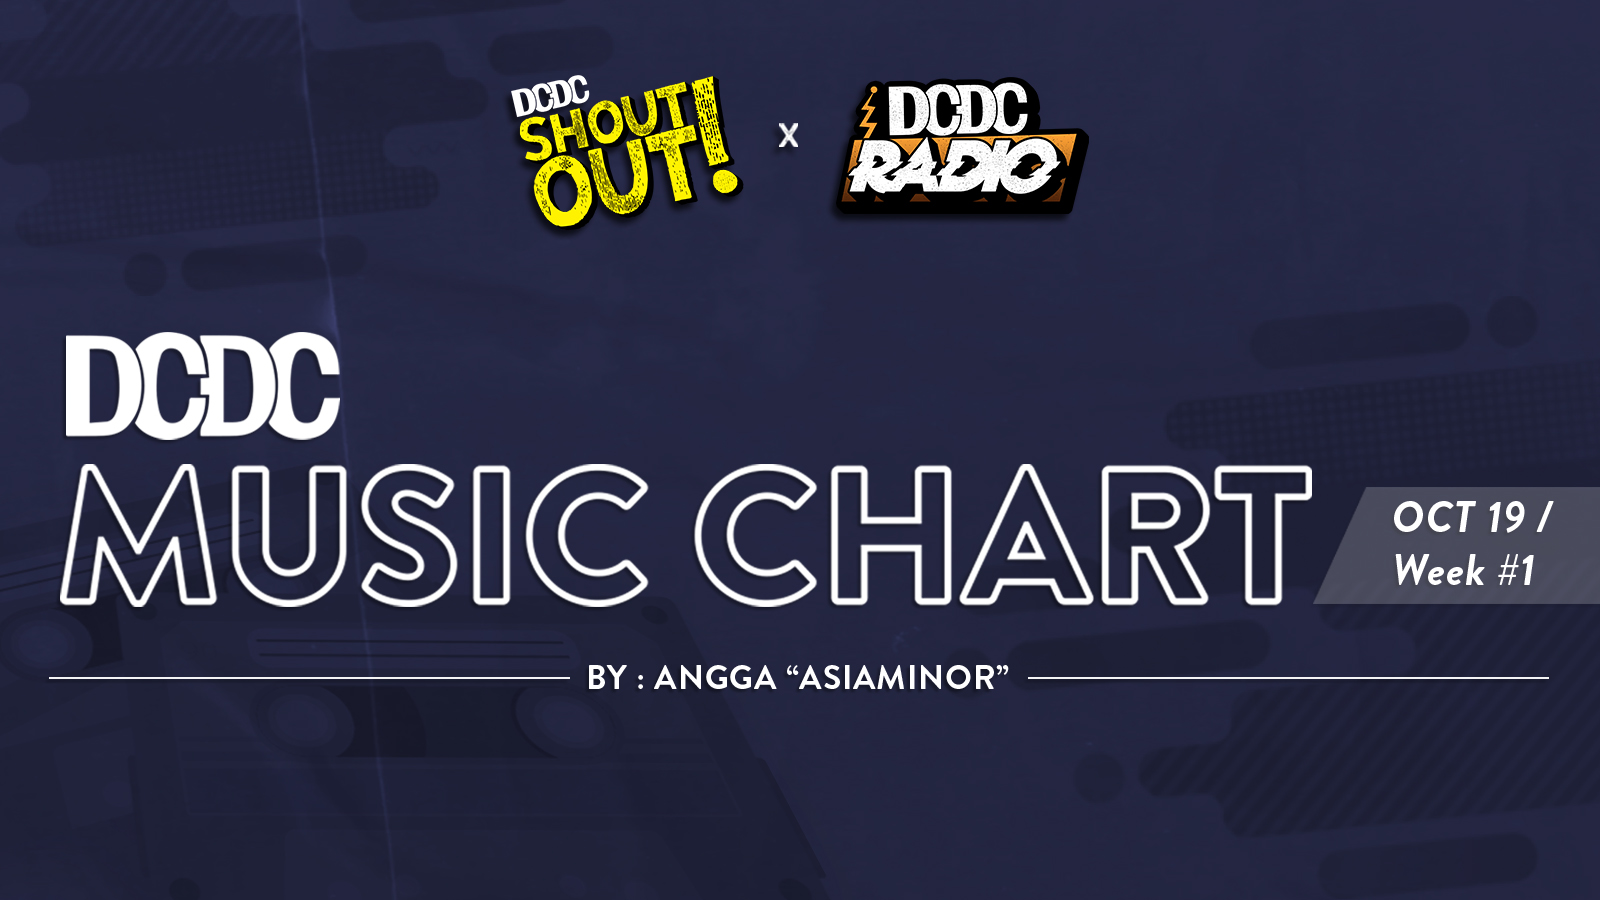 DCDC Music Chart - #1st Week of October 2019